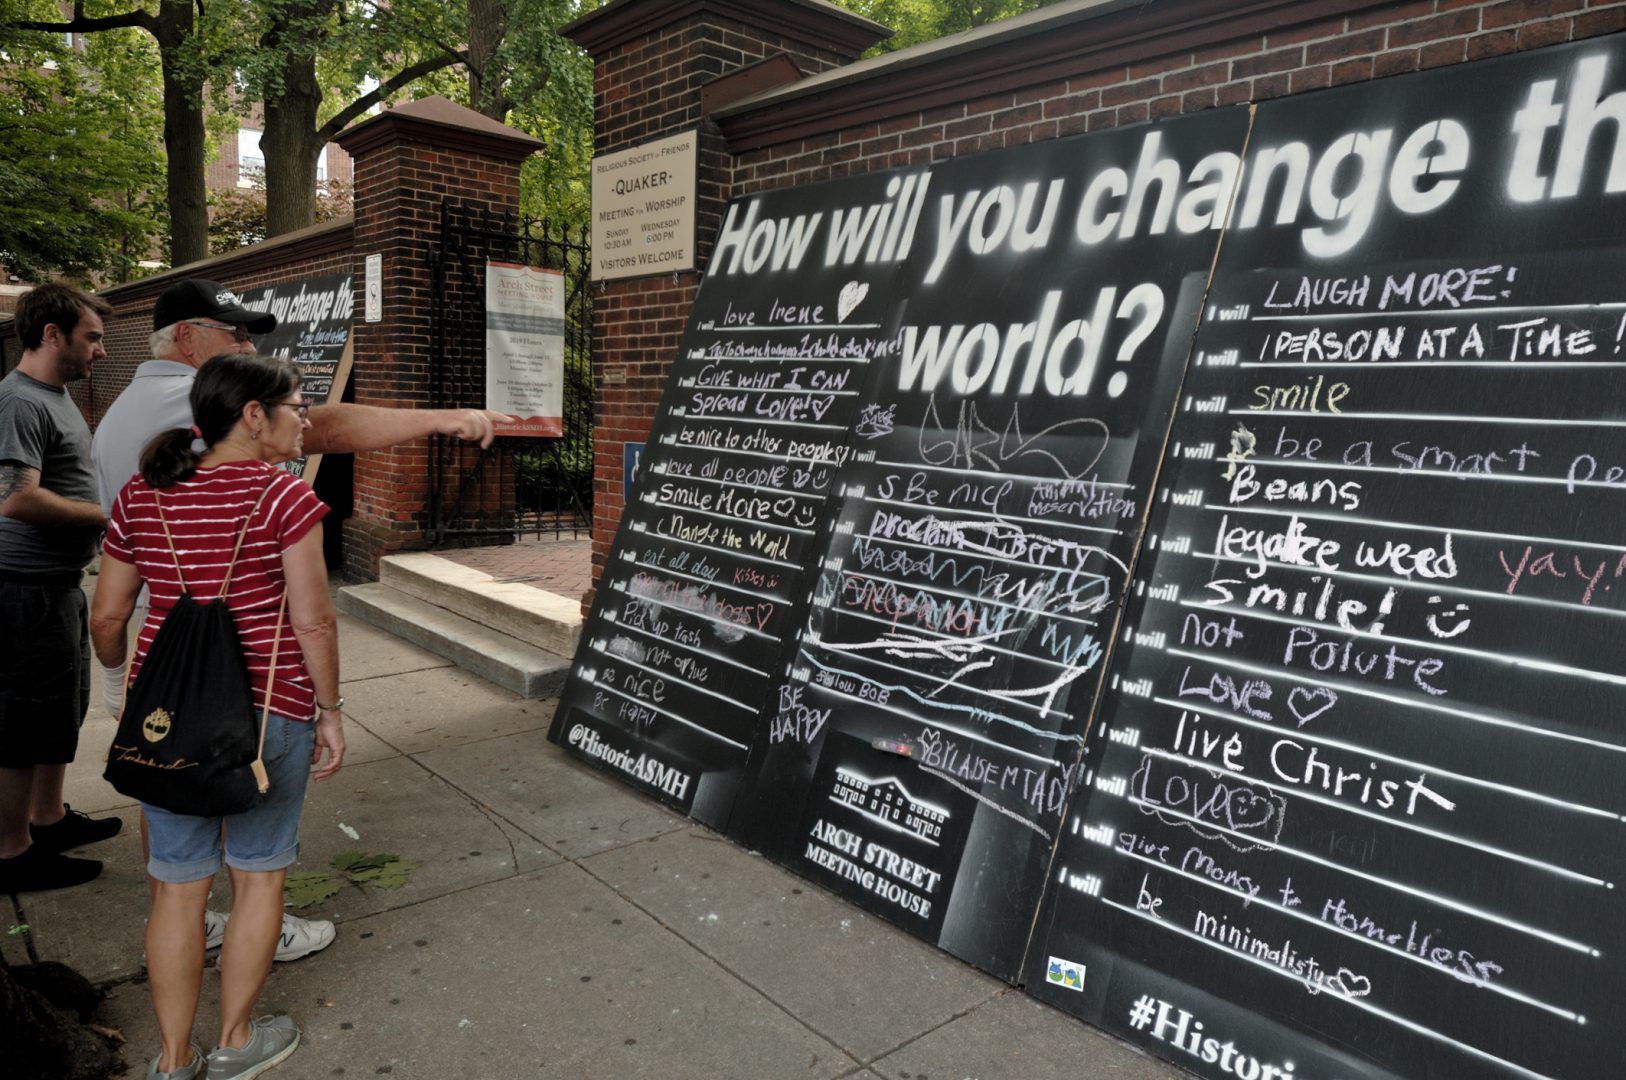 Philadelphia, PA, USA - June 17, 2019; Tourist walk past a large chalk board, that reads How Will You Change The World, outside the historic Arch Street Friends Meeting House in Old City, Philadelphia, PA on June 17, 2019. During the high season large groups of tourists are drawn to the pre-colonial charm of Old City and the historic significance of Independence National Historical Park.